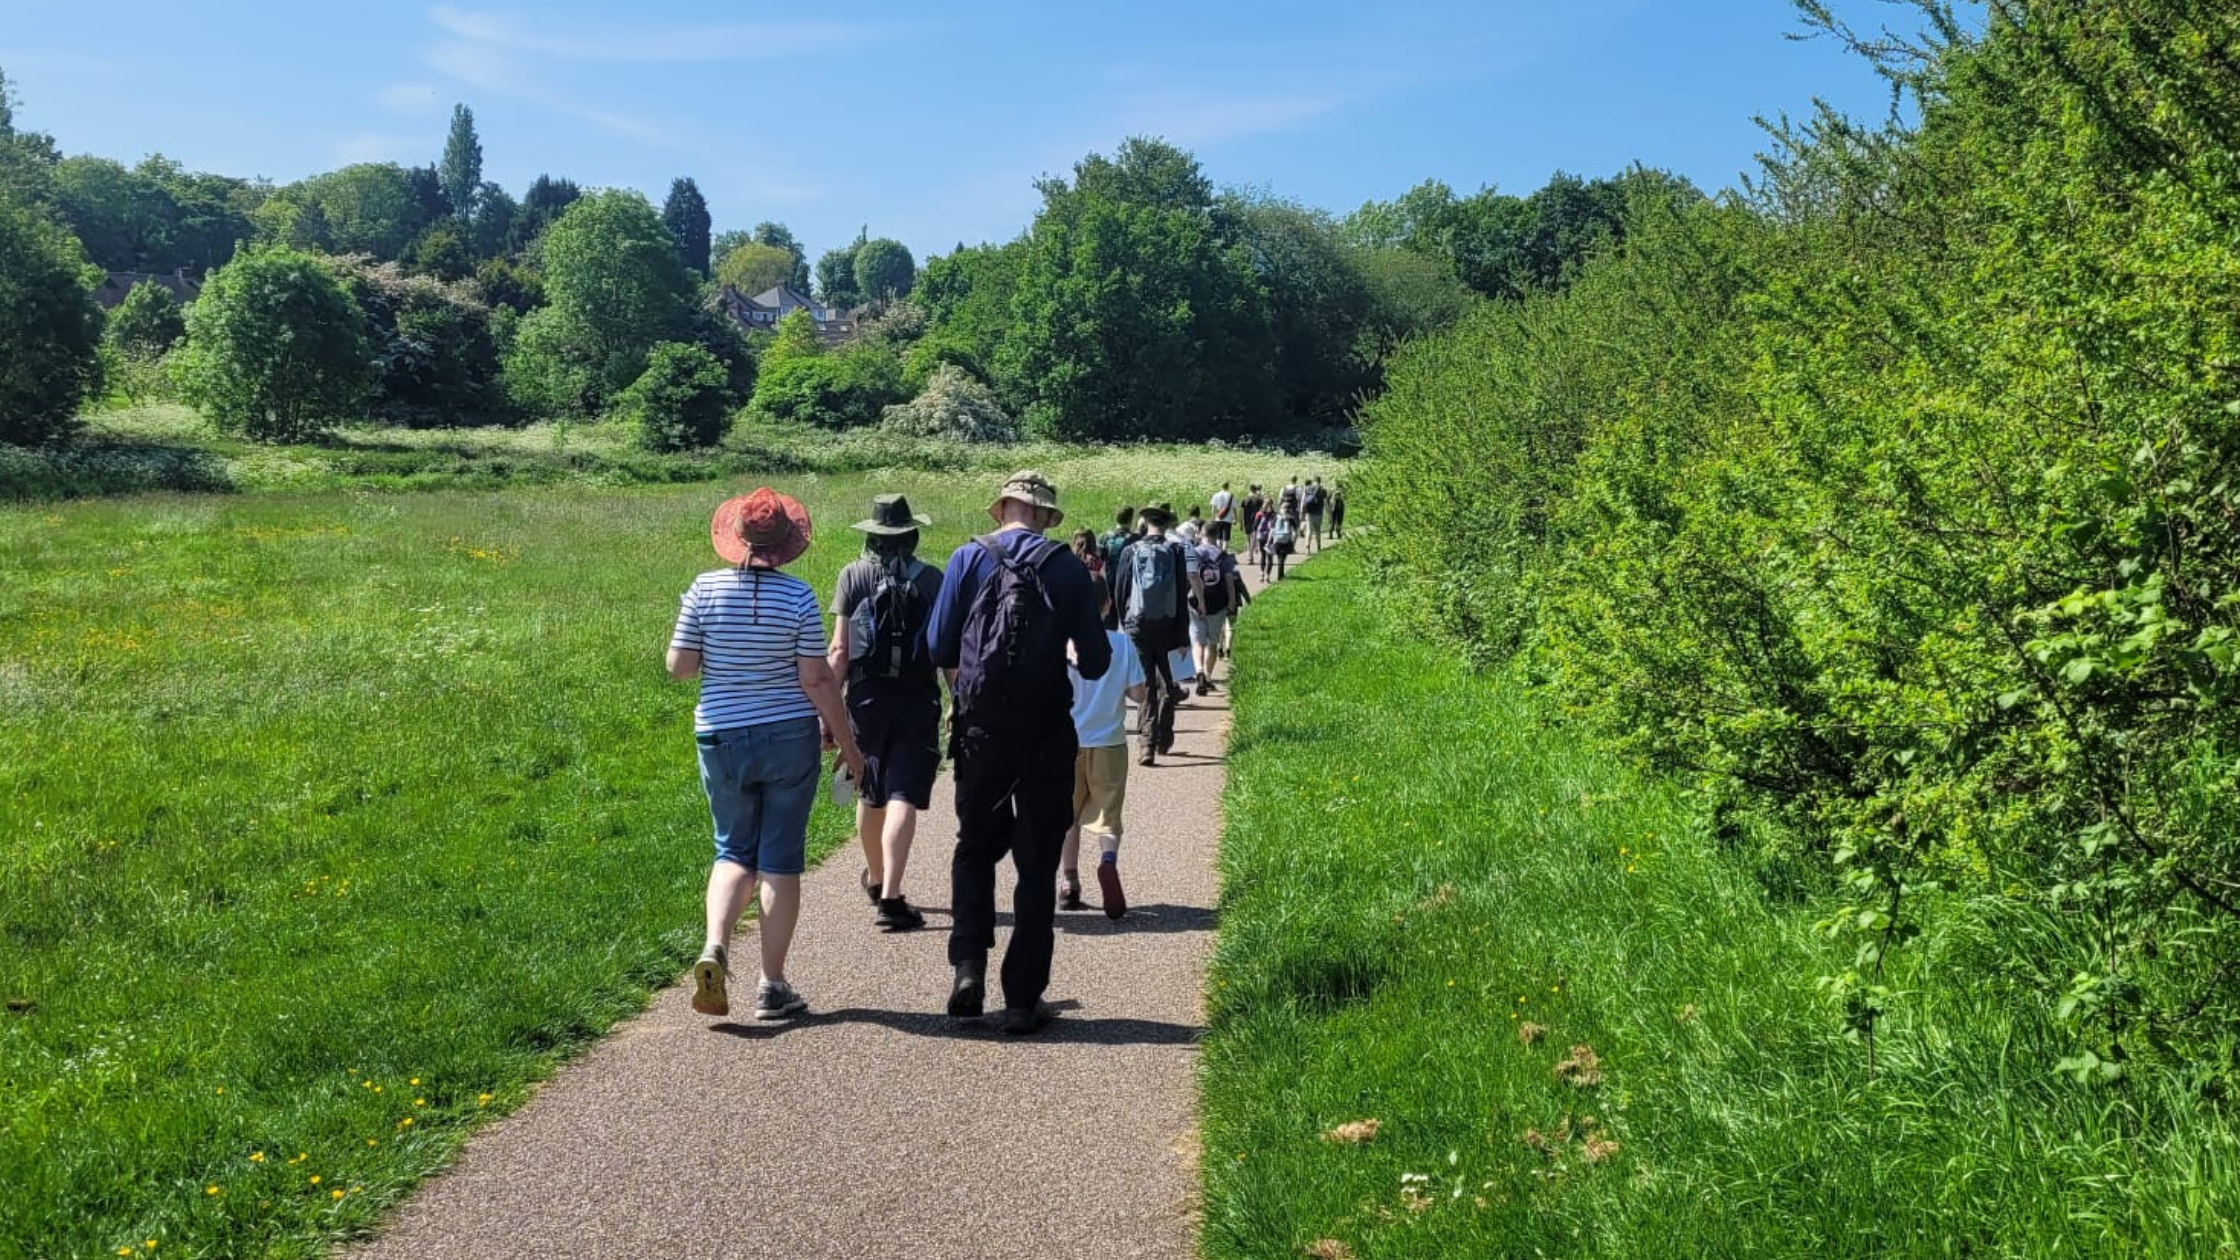 Our walk with us group making their way through Manor Farm Park.